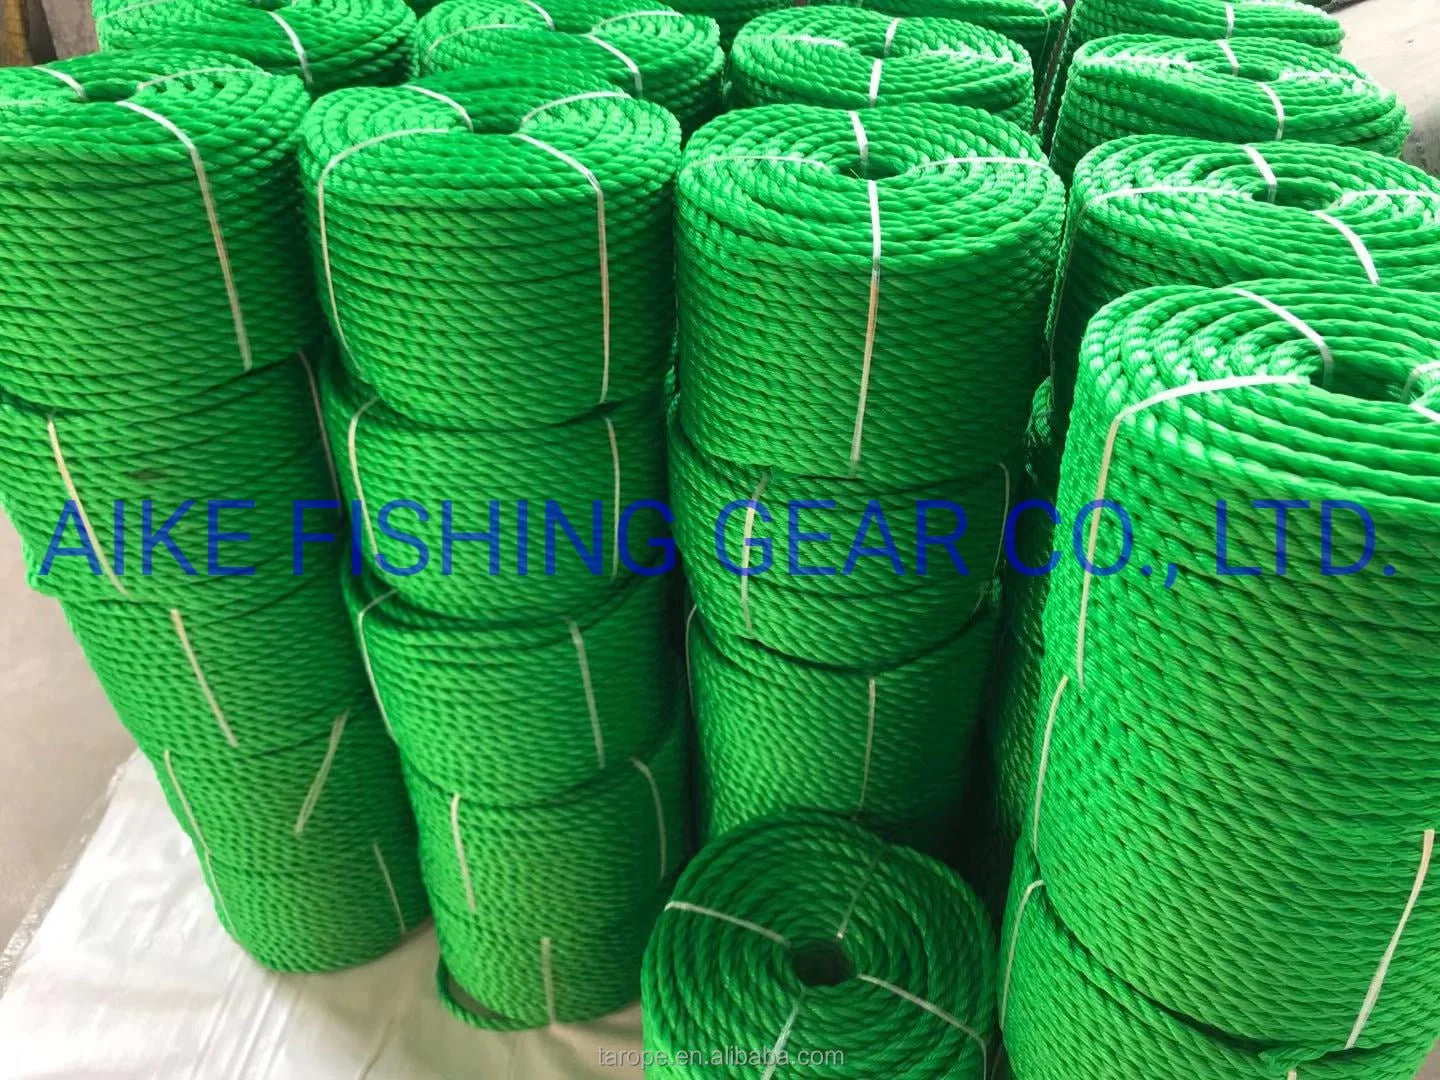 PP 4mm-40mm Ropes, 4mm/6mm/10mm/16mm Polyester/Nylon Braided Rope Polypropylene Waterproof Ropes